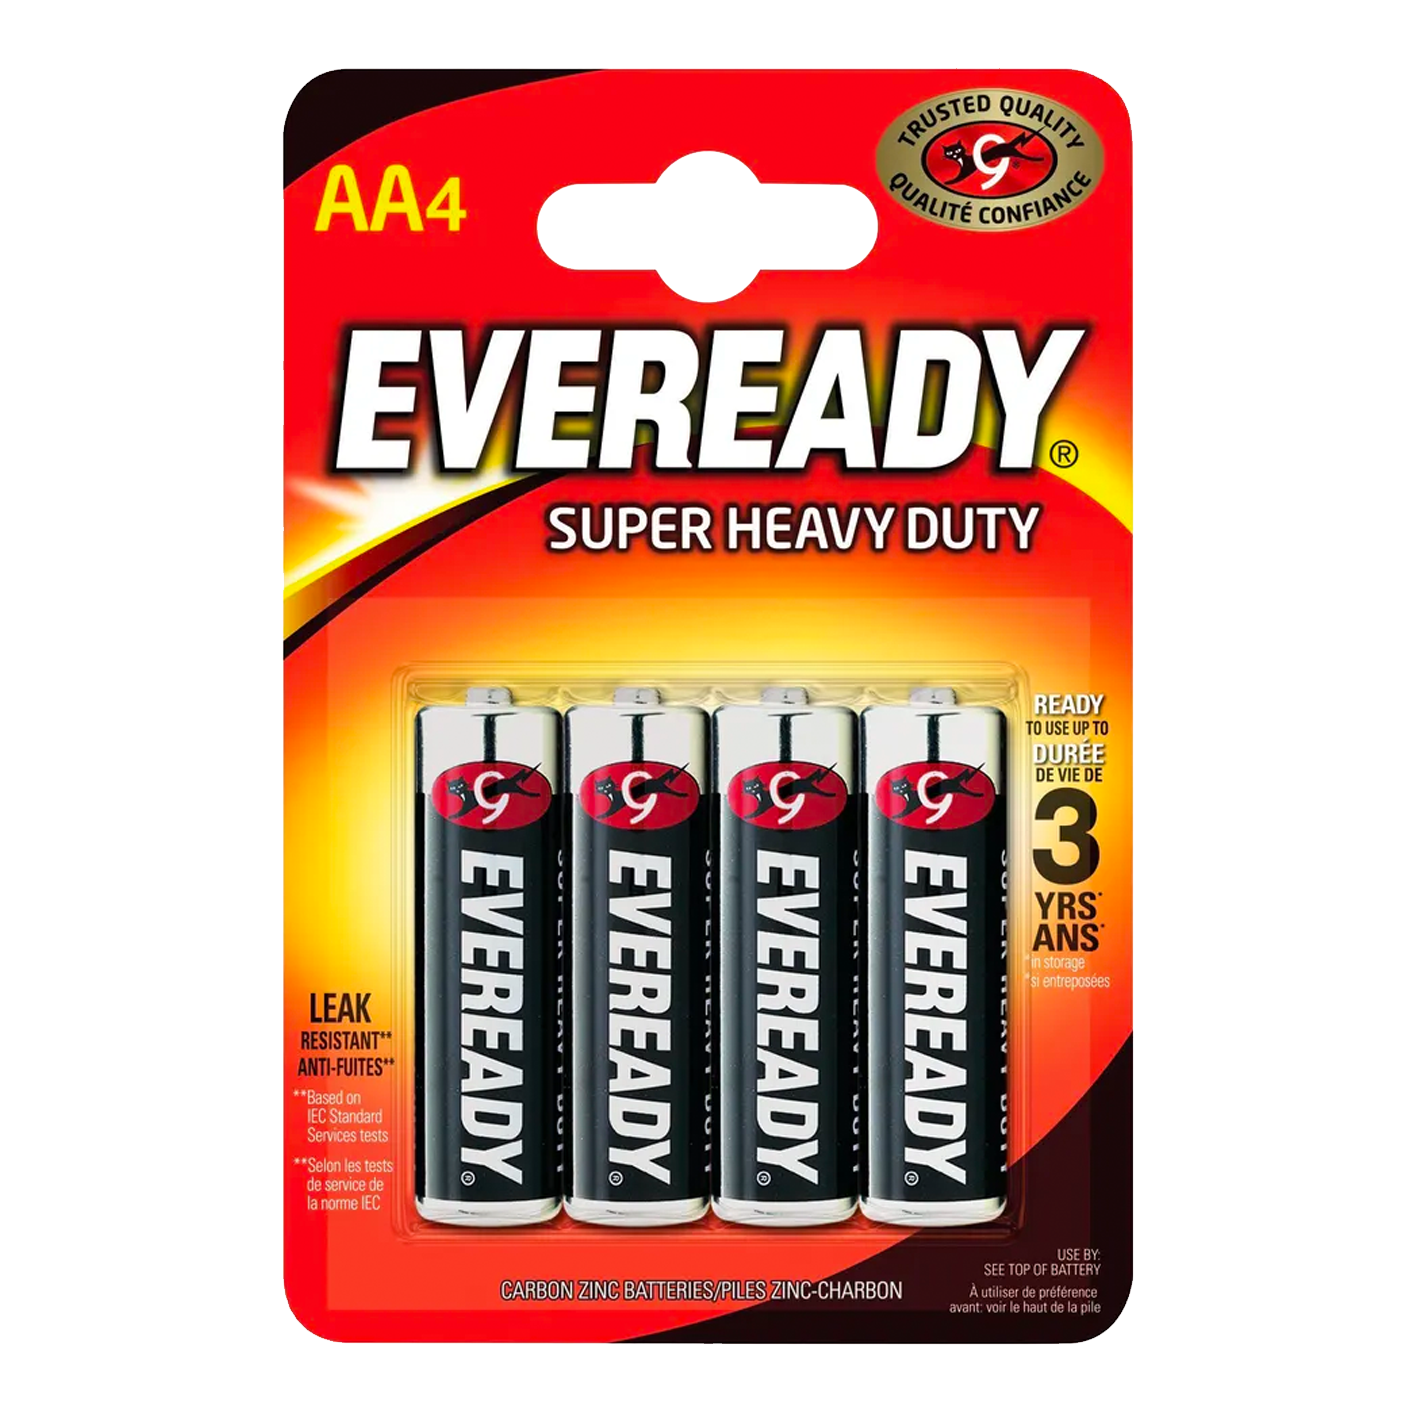 Eveready AA Super Heavy Duty, Pack of 4